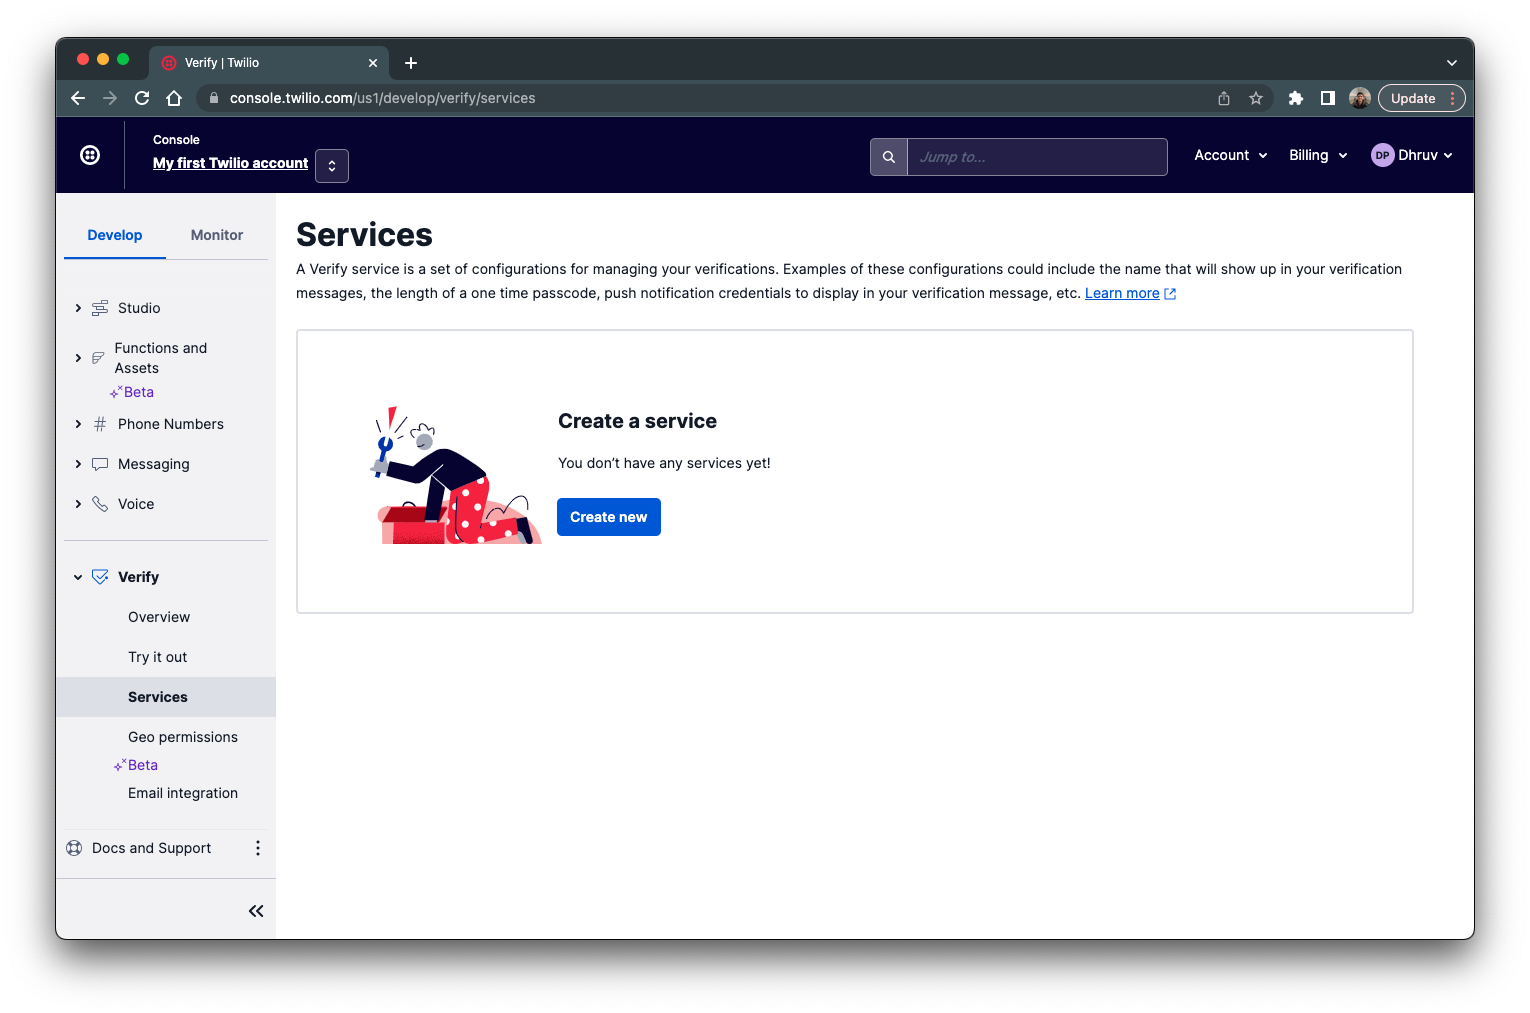 Services page within the Twilio Verify section